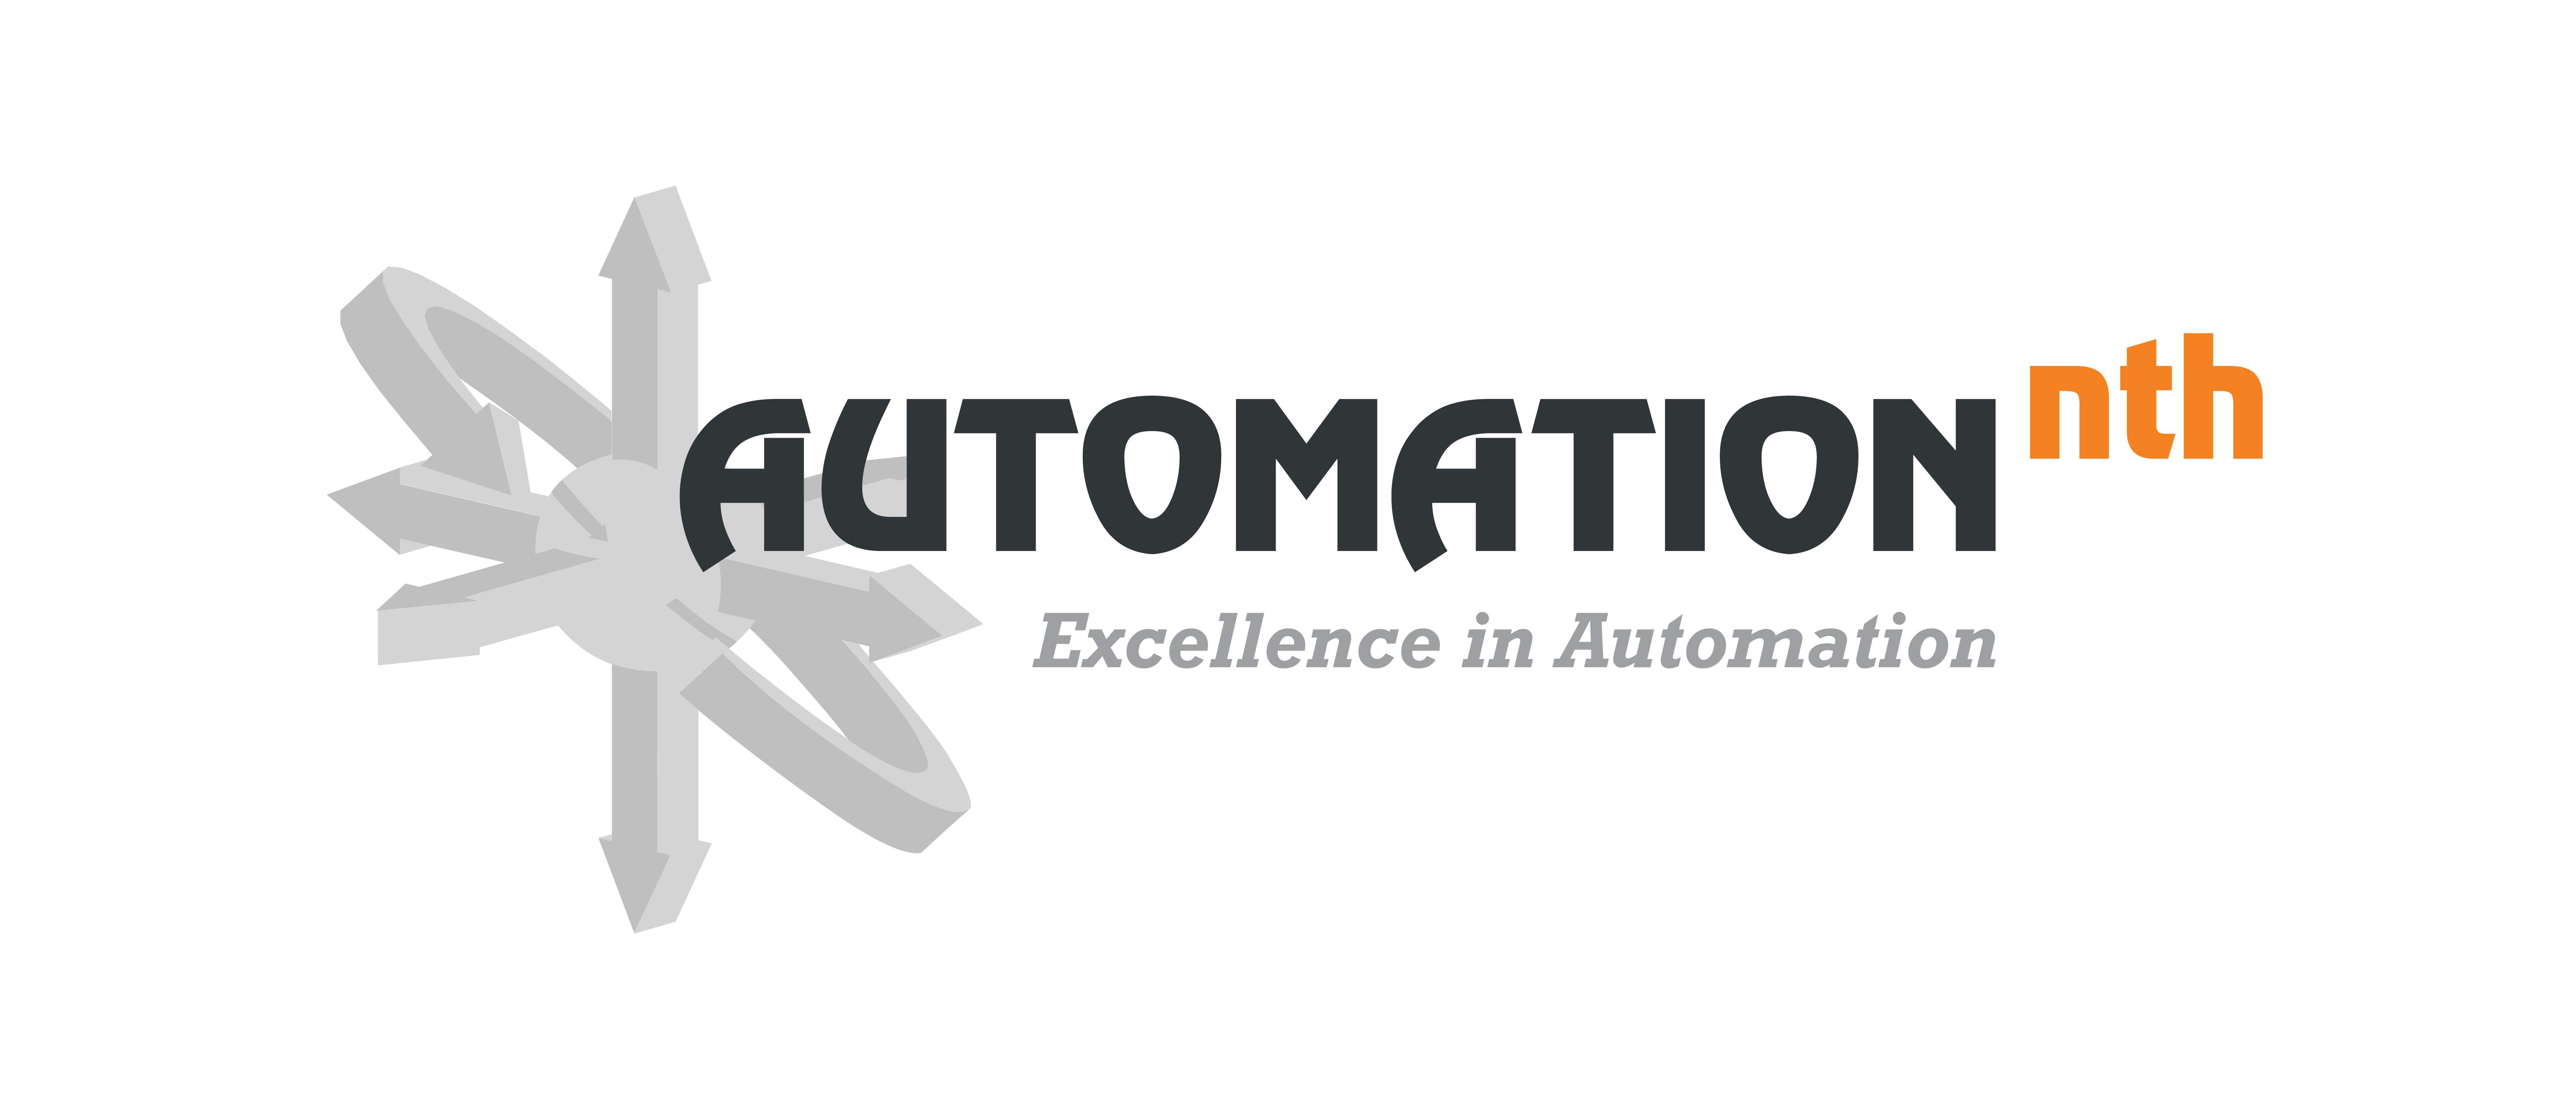 Automation Logo - Automation Engineering, Control System Integration, & Control Panels